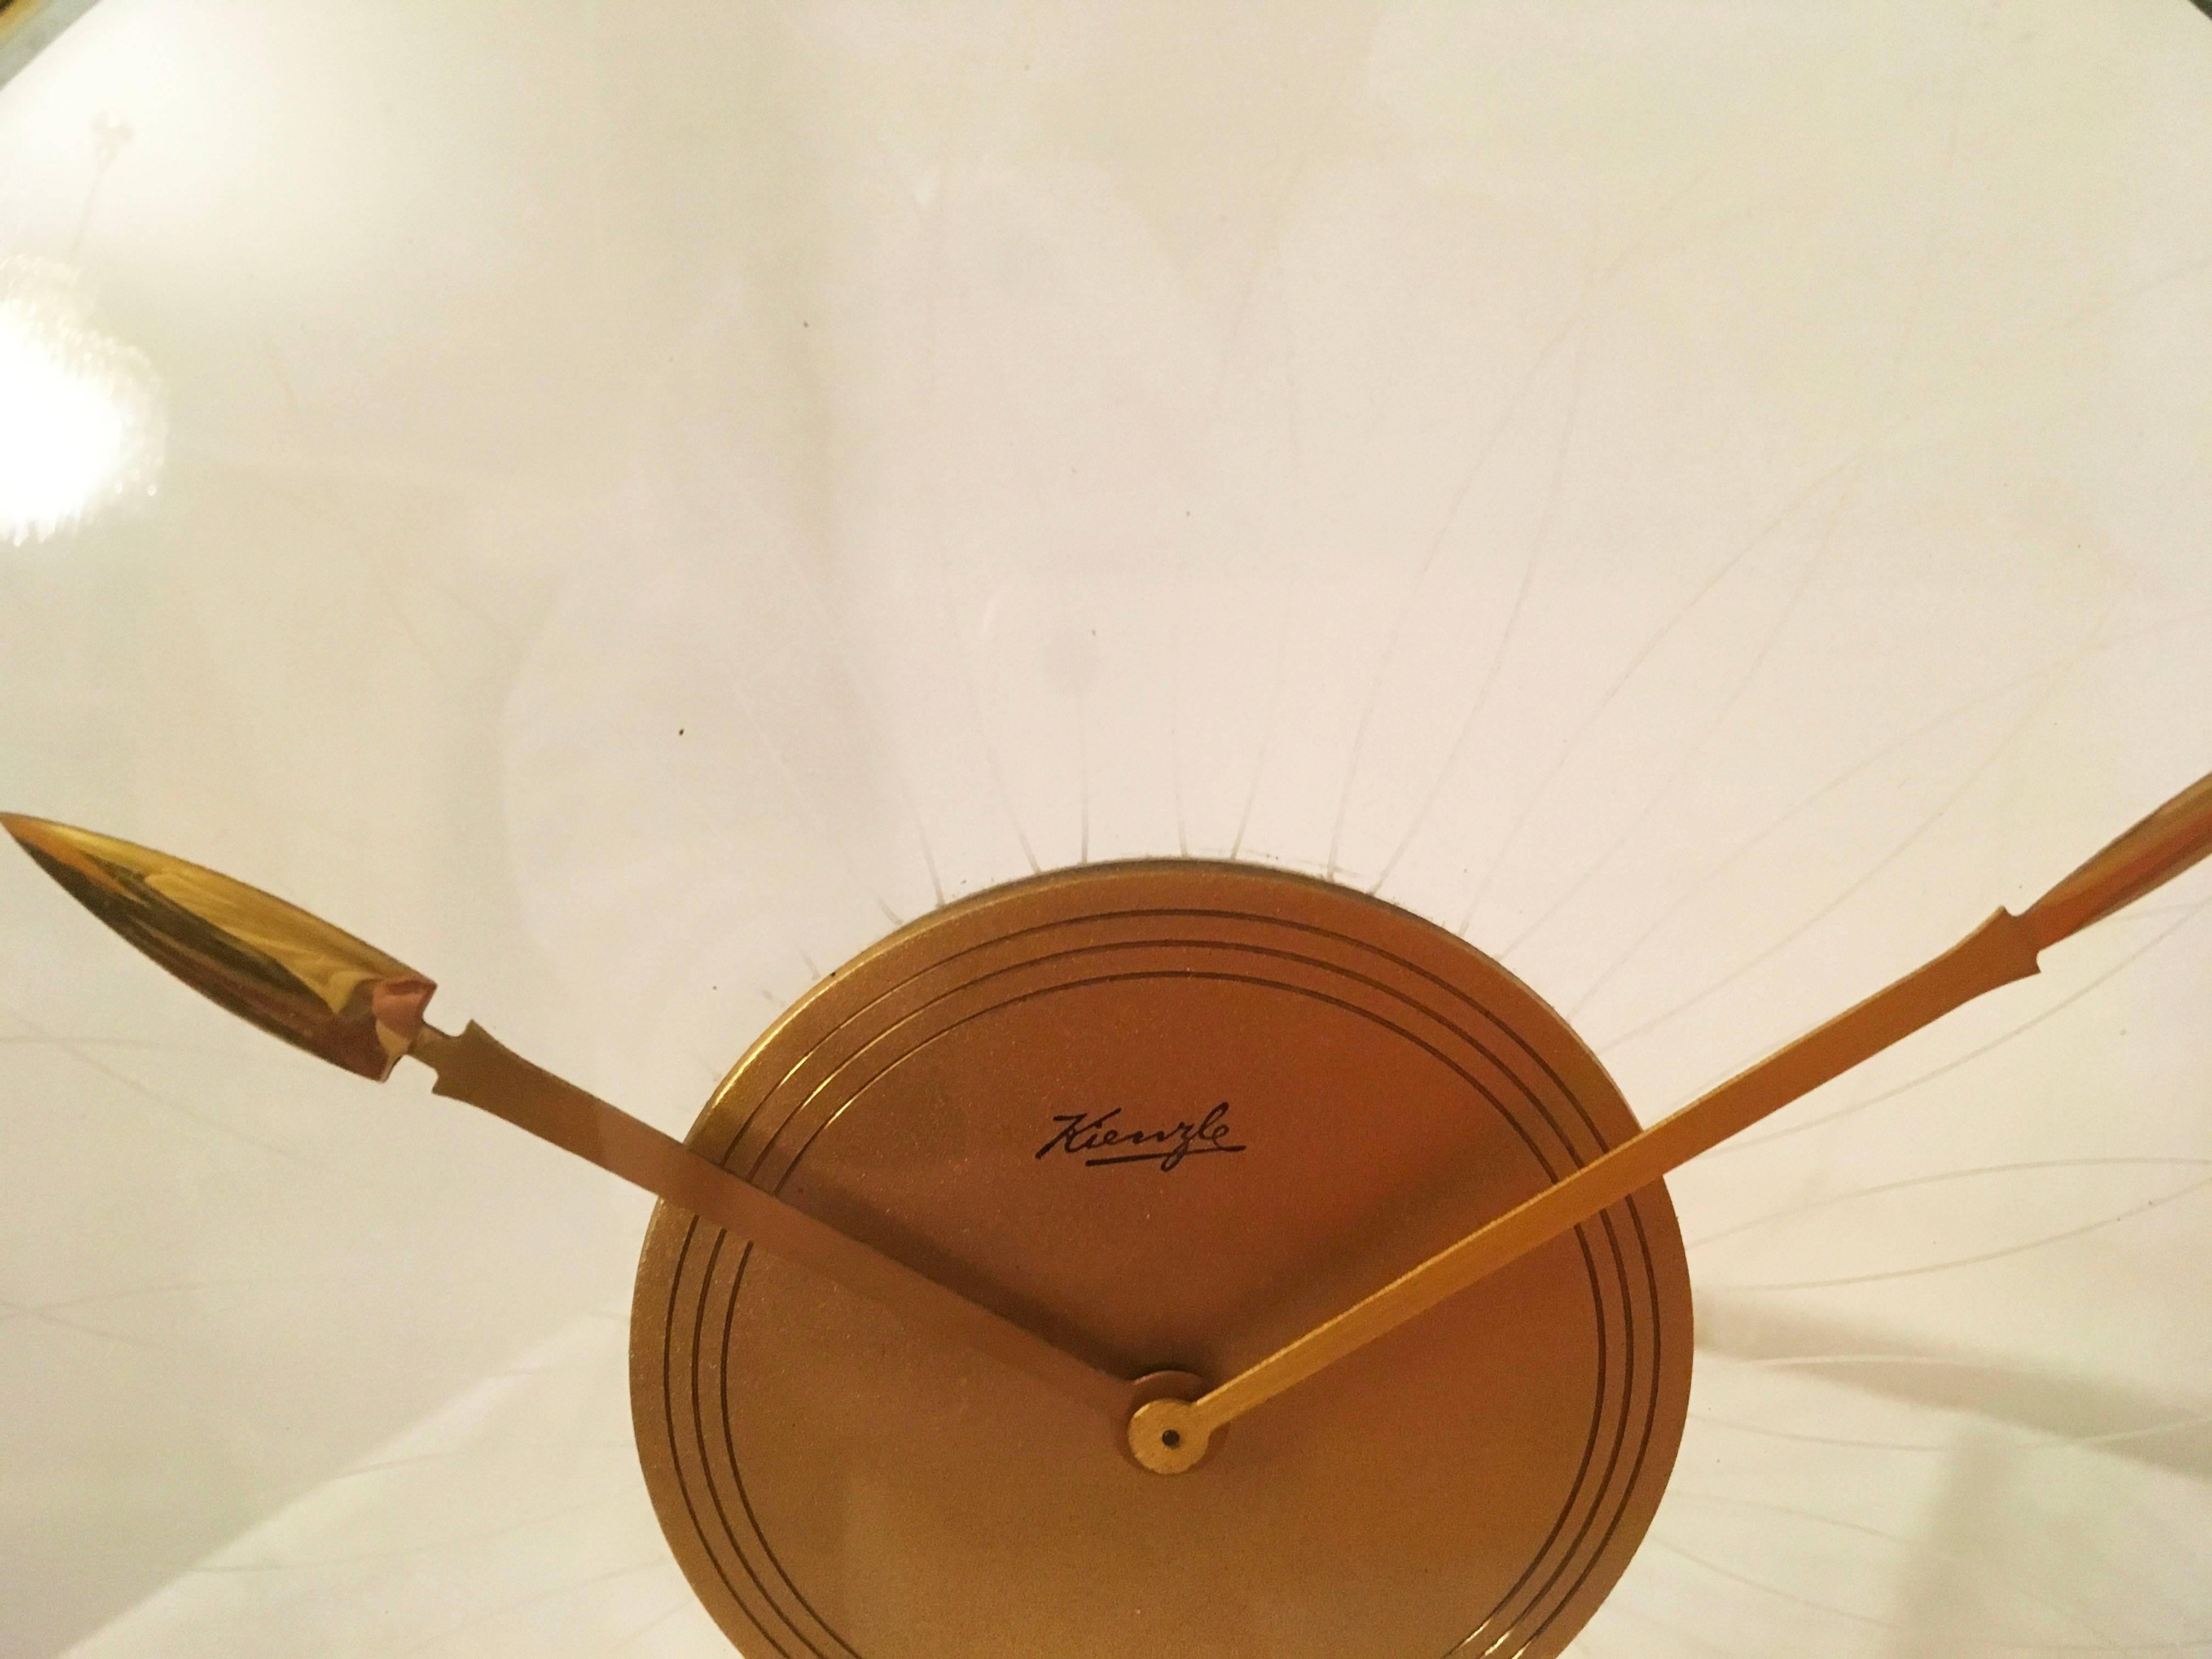 Kienzle table clock from the 1930s designed by Heinrich Möller.
Brass with glass construction fitted with a mechanical movement.